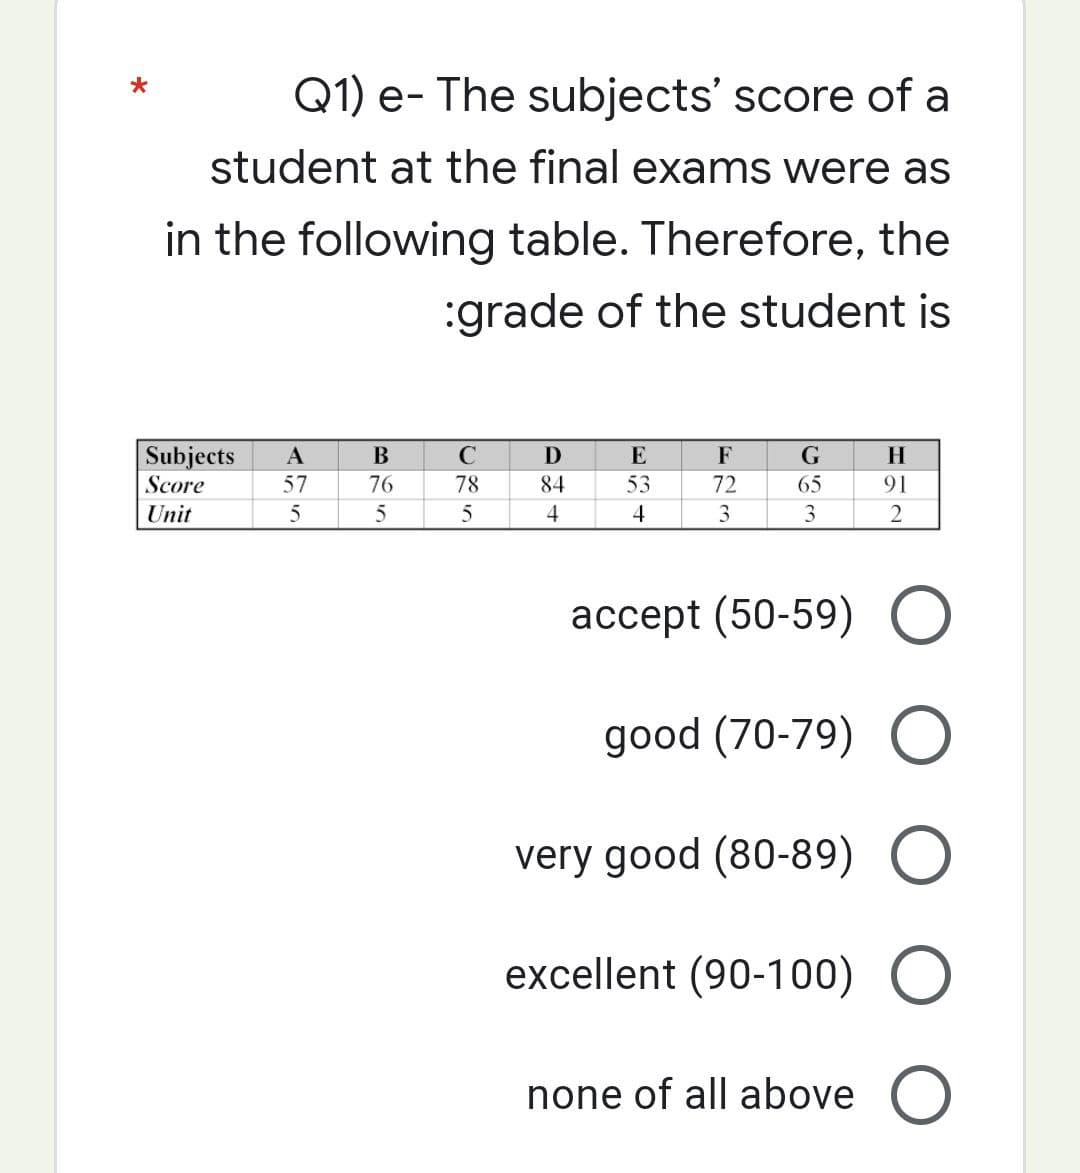 *
Q1) e- The subjects' score of a
student at the final exams were as
in the following table. Therefore, the
:grade of the student is
B
с
D
E
F
G
H
Subjects A
Score
57
76
84
53
72
65
91
Unit
5
4
4
3
3
2
accept (50-59) O
good (70-79) O
very good (80-89) O
excellent (90-100) O
none of all above O
210
5
CRS
78